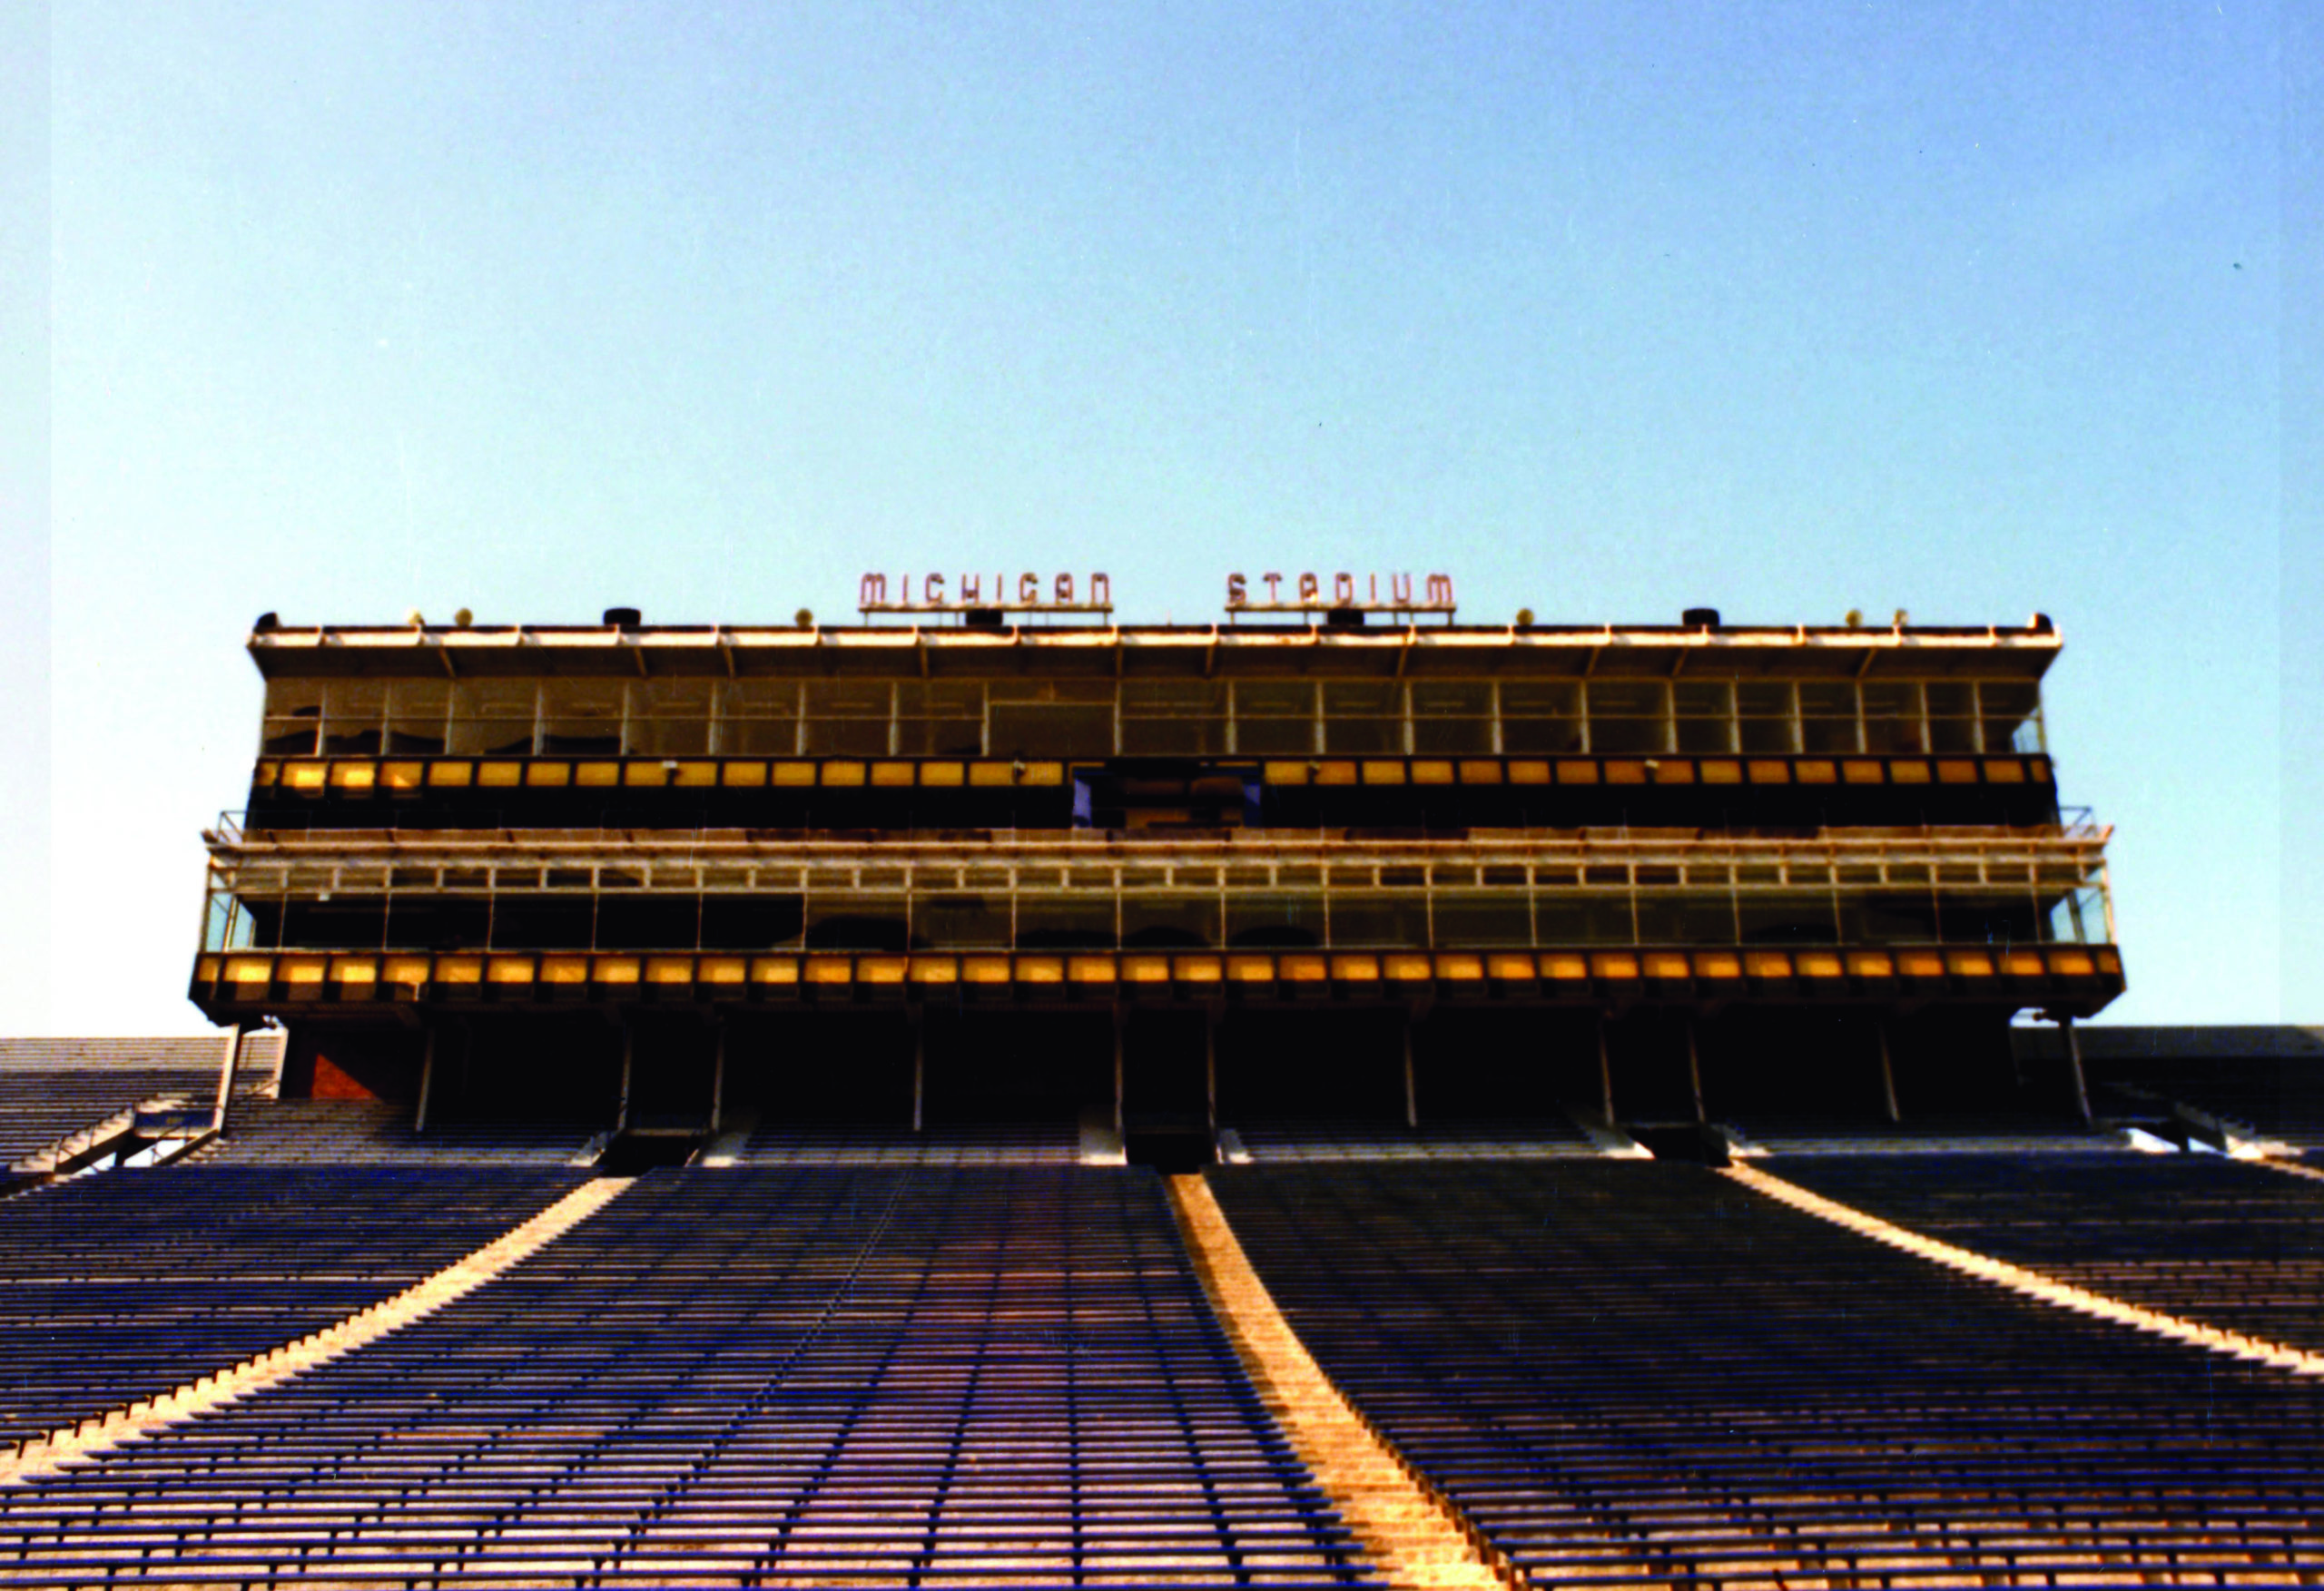 Vintage photo of the Michigan Stadium press box from the view of the field